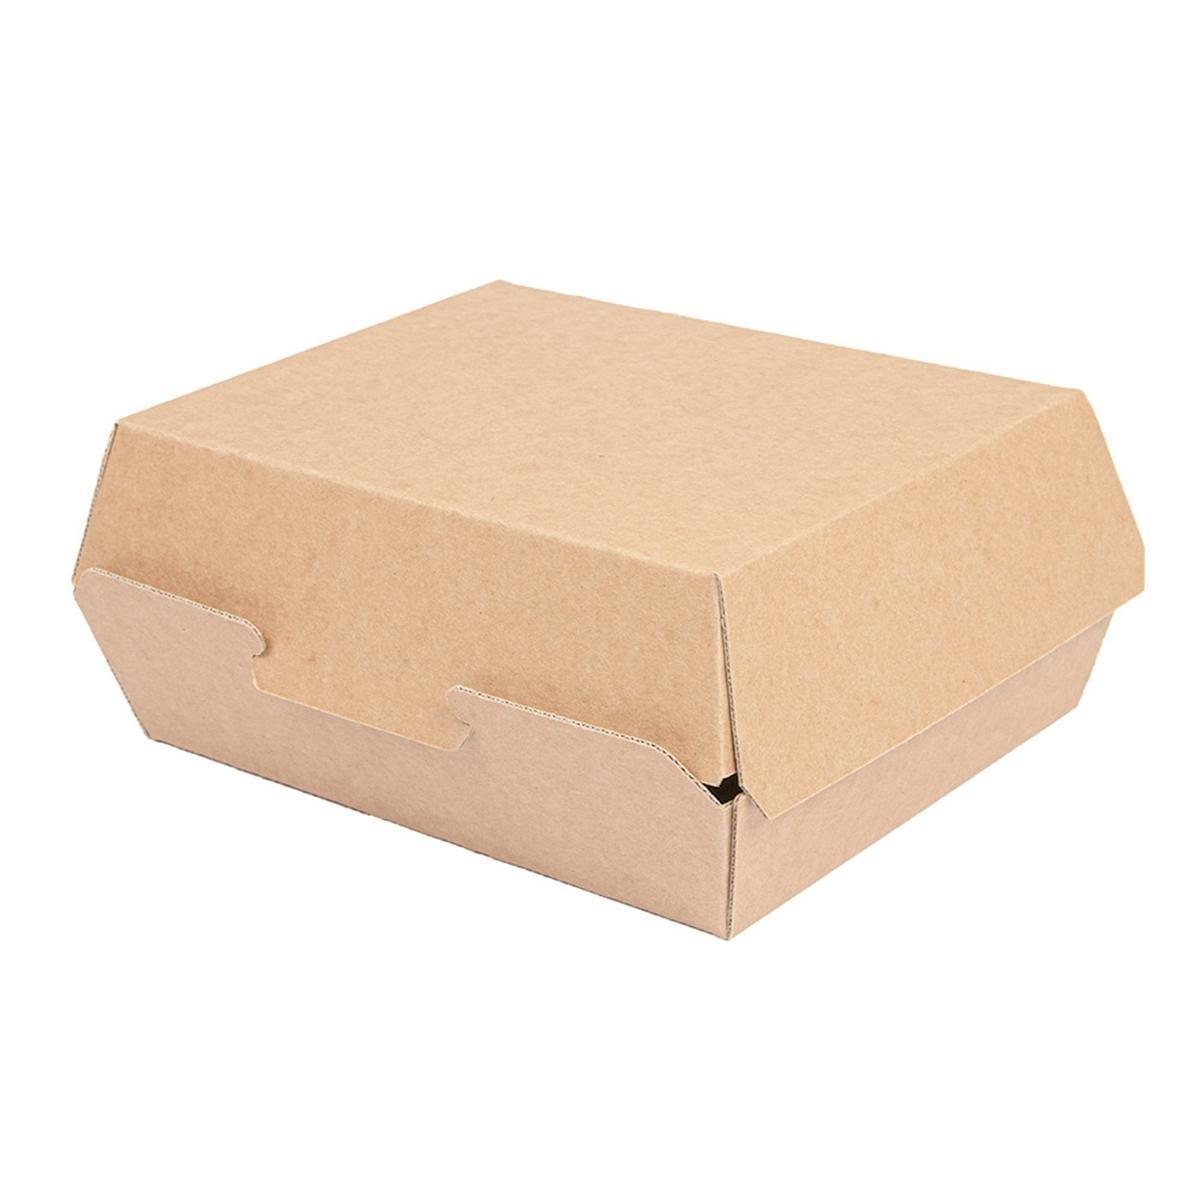 CAJA LUNCH BLANCA/NATURAL THEPACK  - 225/190x180/145x90 MM